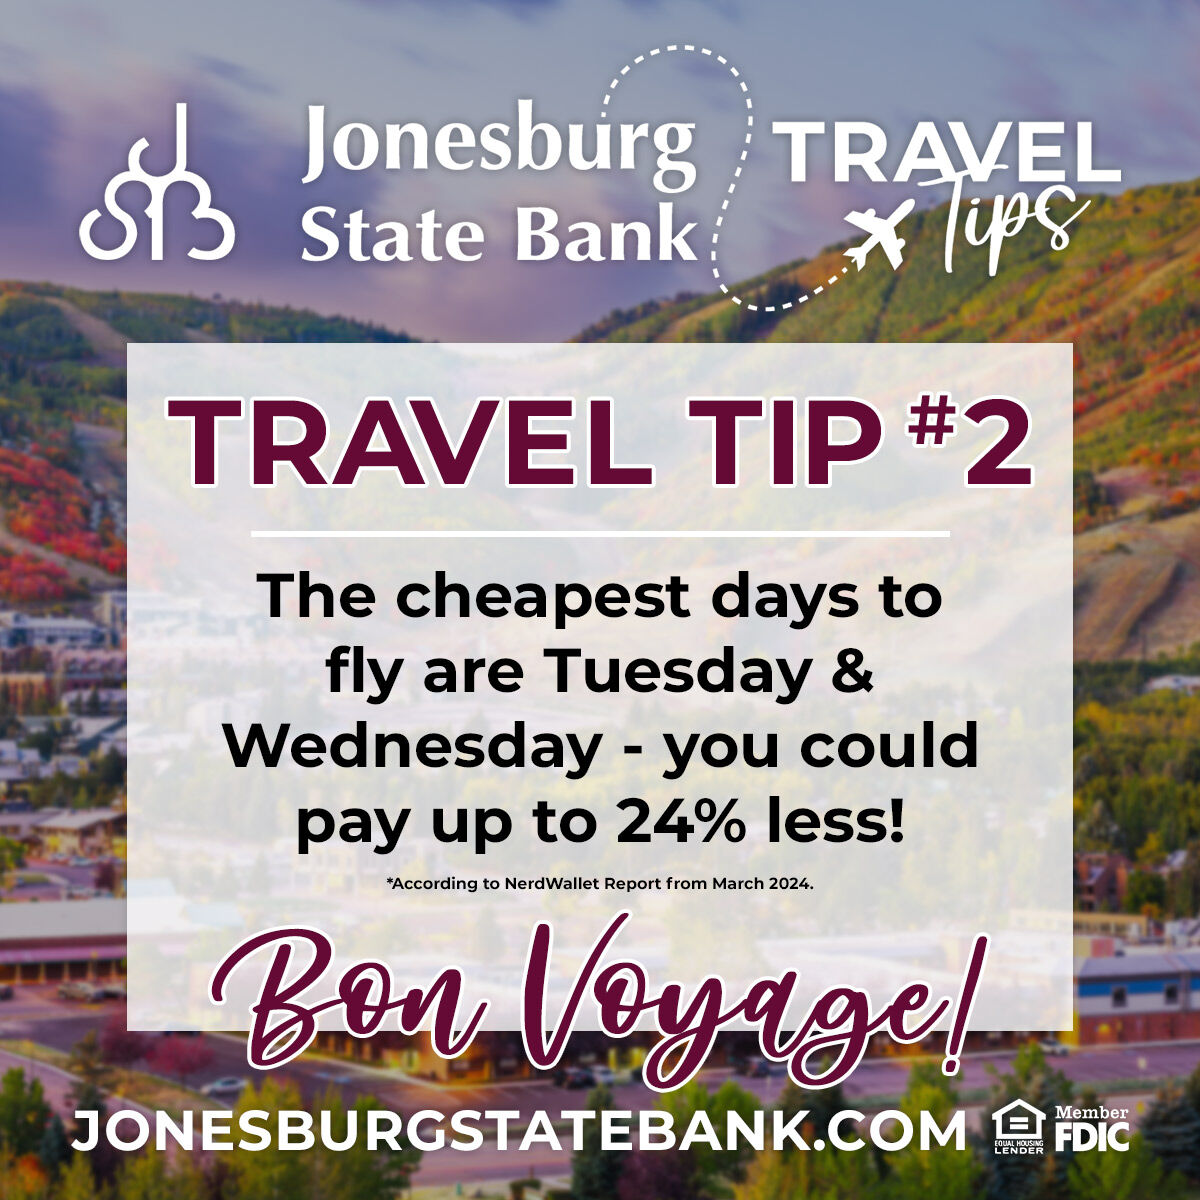 ✈️ Planning your next getaway? Save big by flying on Tuesday or Wednesday! ✈️
According to experts, these are the cheapest days to fly, possibly saving you up to 24%! Make your travel budget go further! 🌍 #TravelTip #SaveOnFlights

Explore more ➡ bit.ly/2y376hE